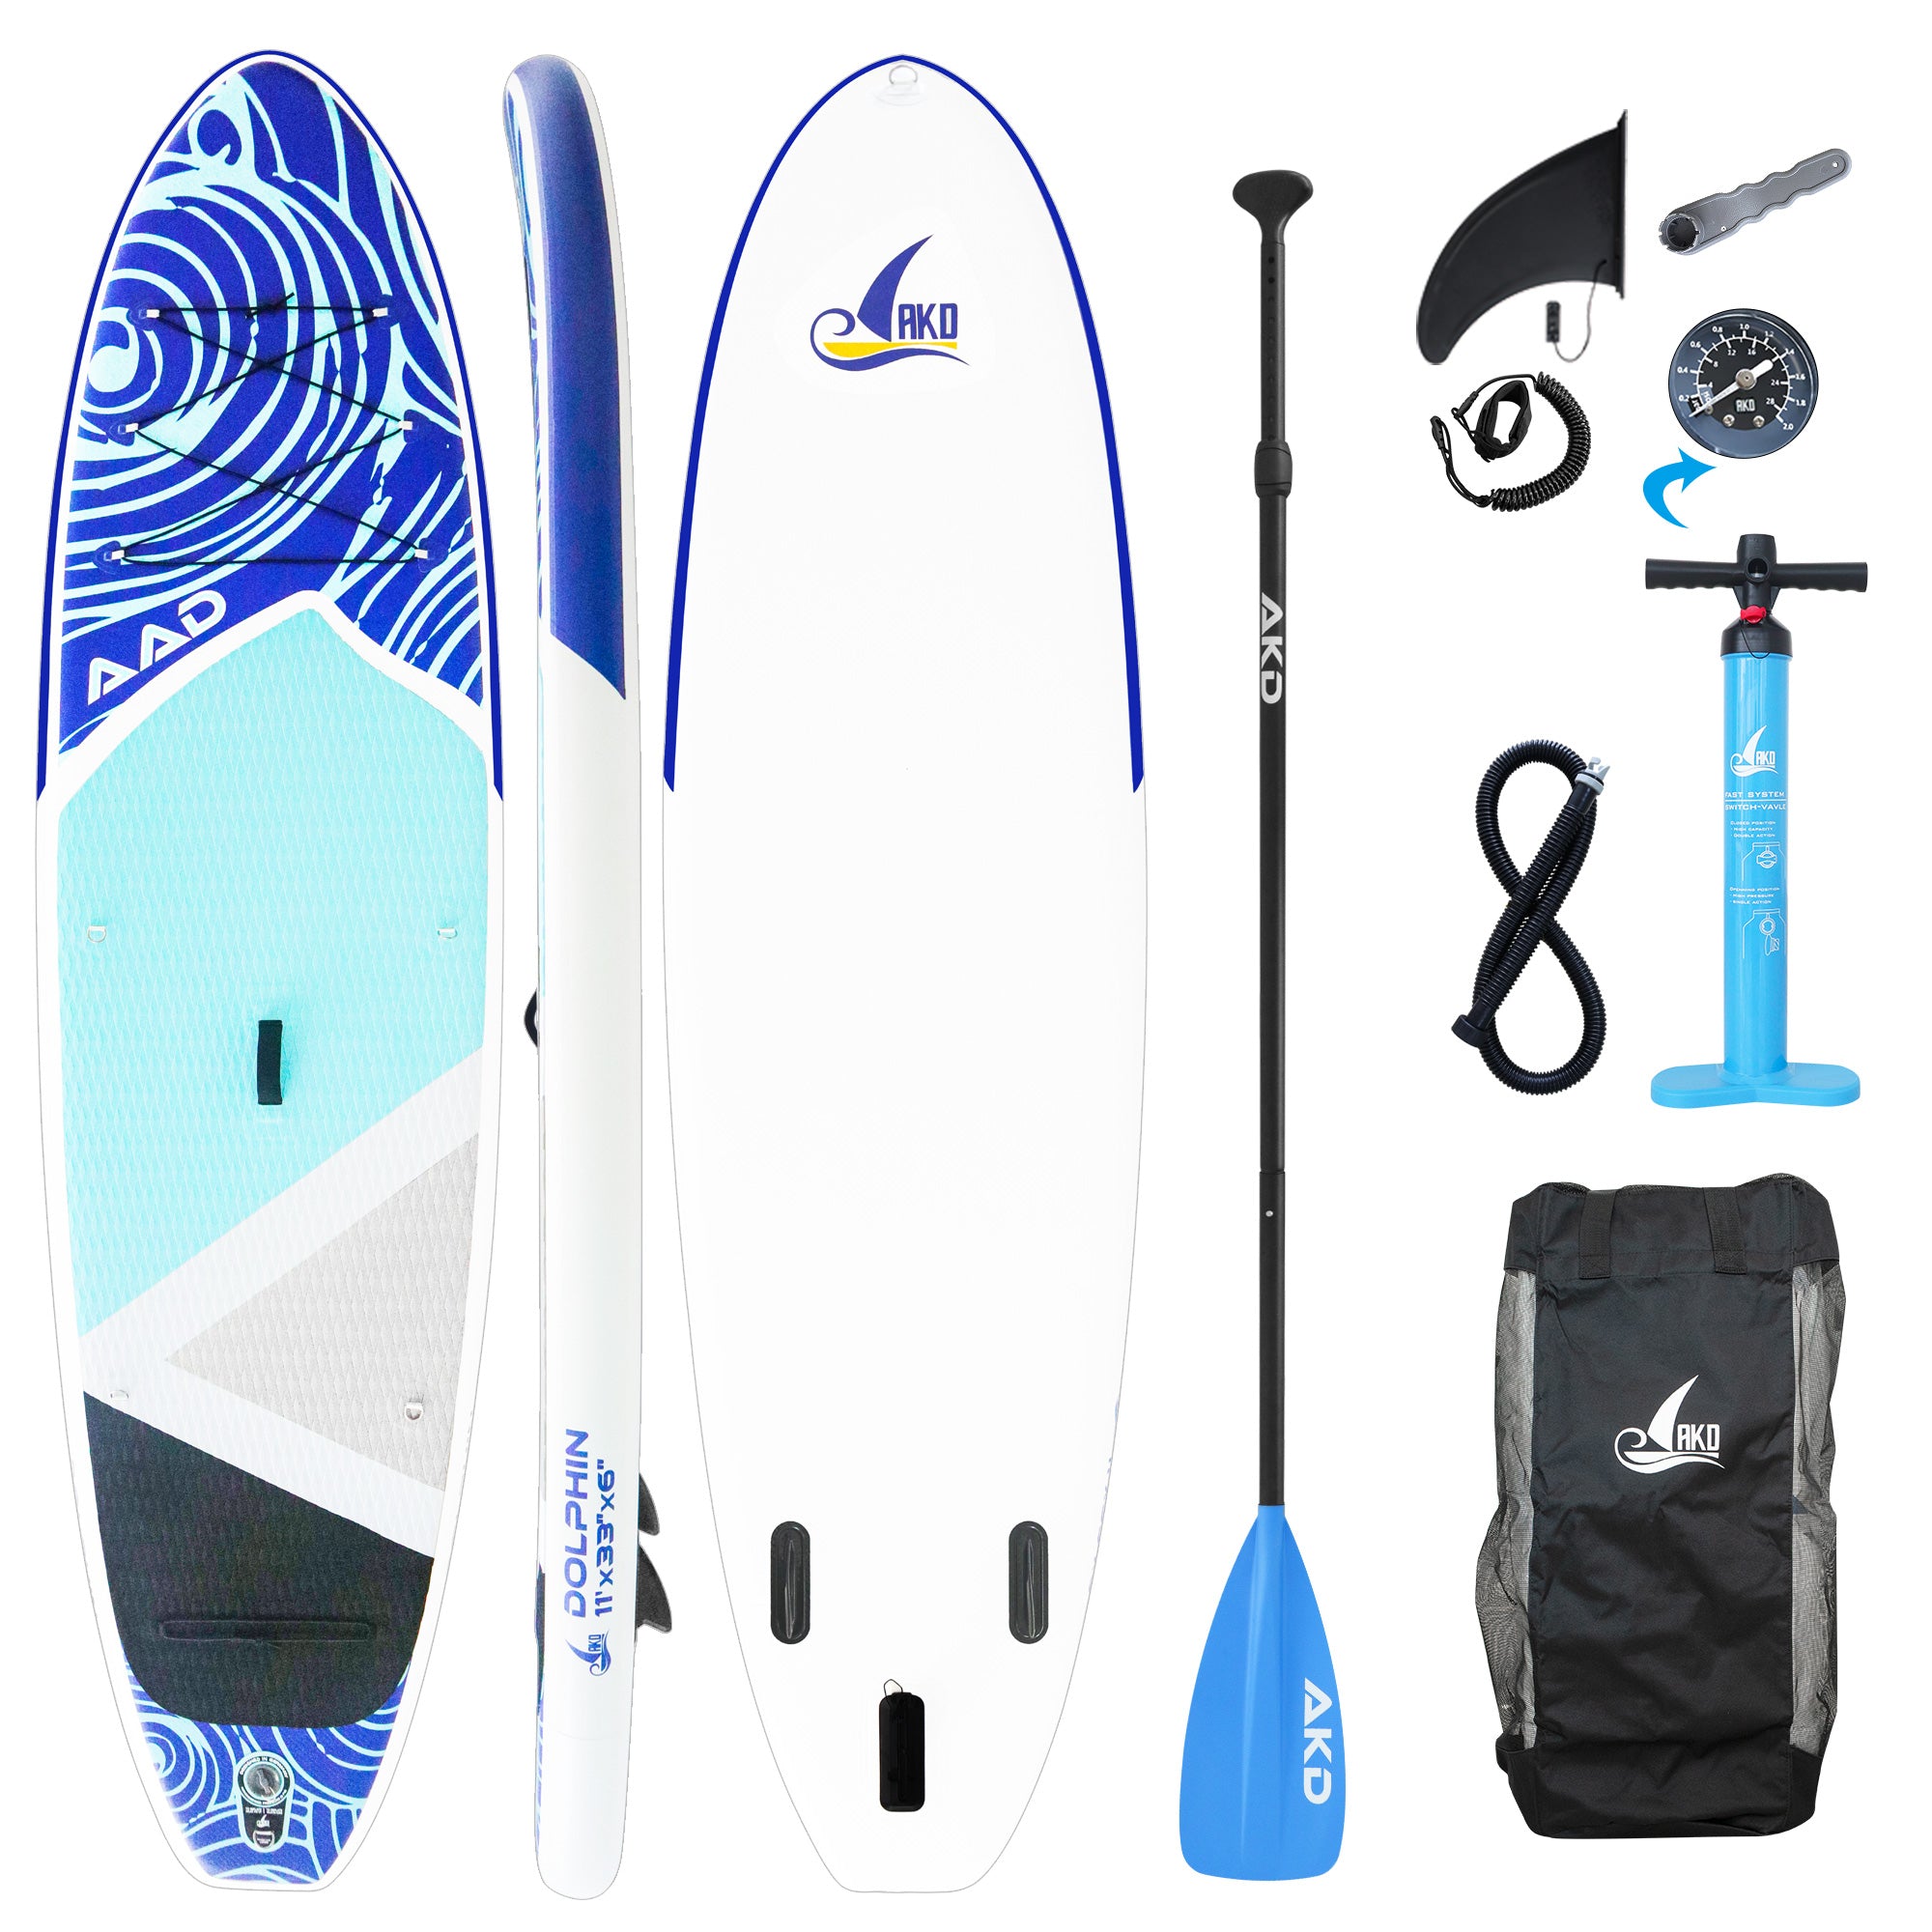 AKD DOLPHIN Stand Up Paddle Board 11' 335x83x15cm SUP Board 170kg/346L (Blue)